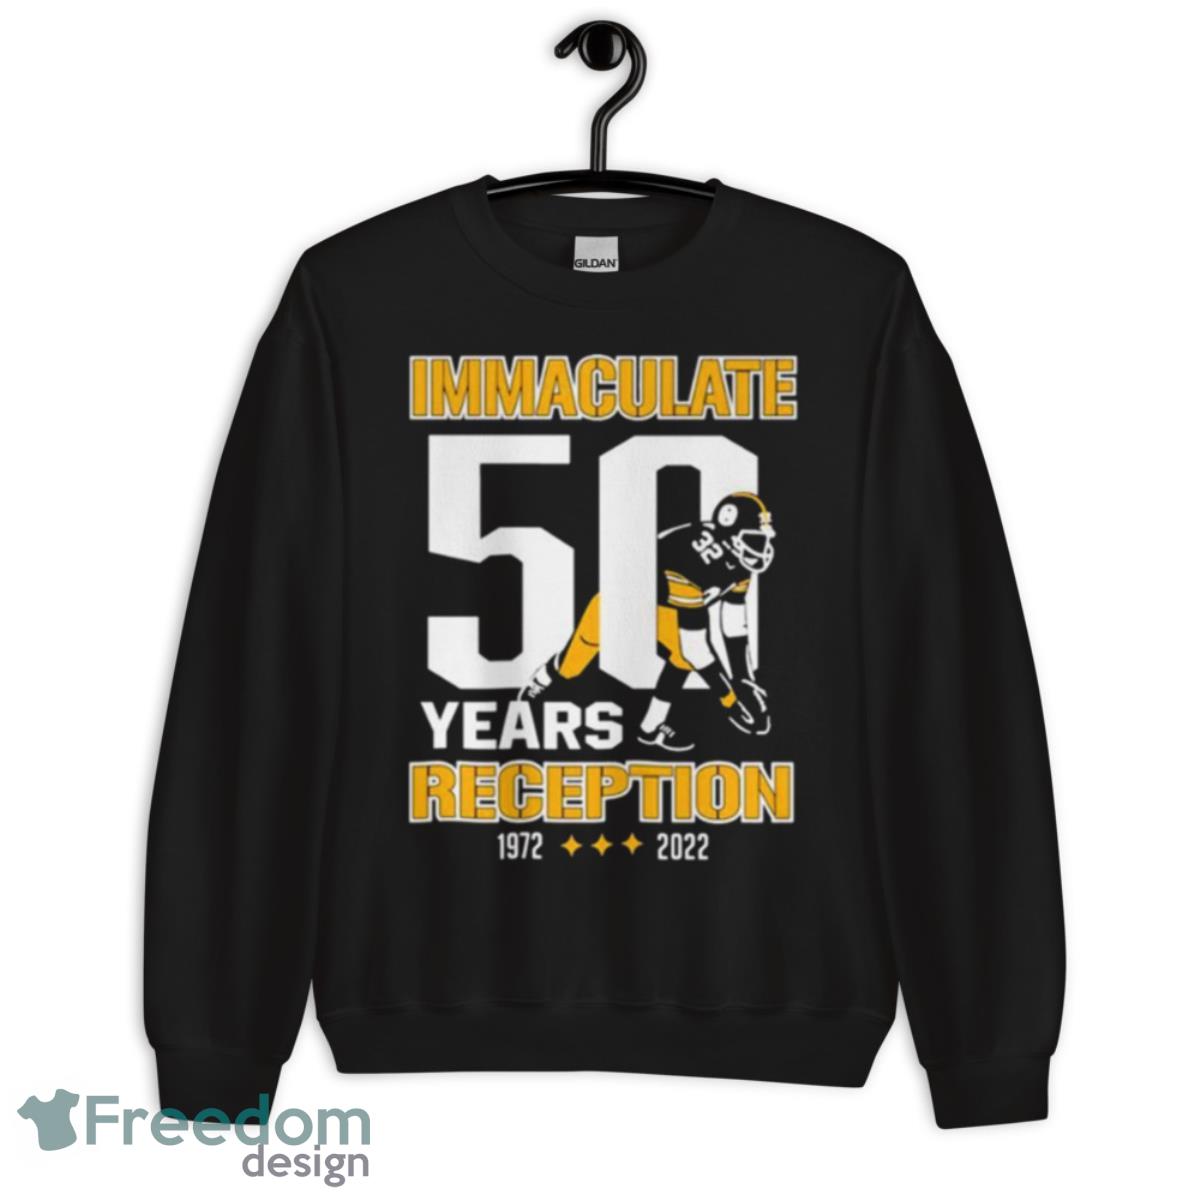 50 Years Immaculate Reception Franco Harris 1972 2022 Shirt